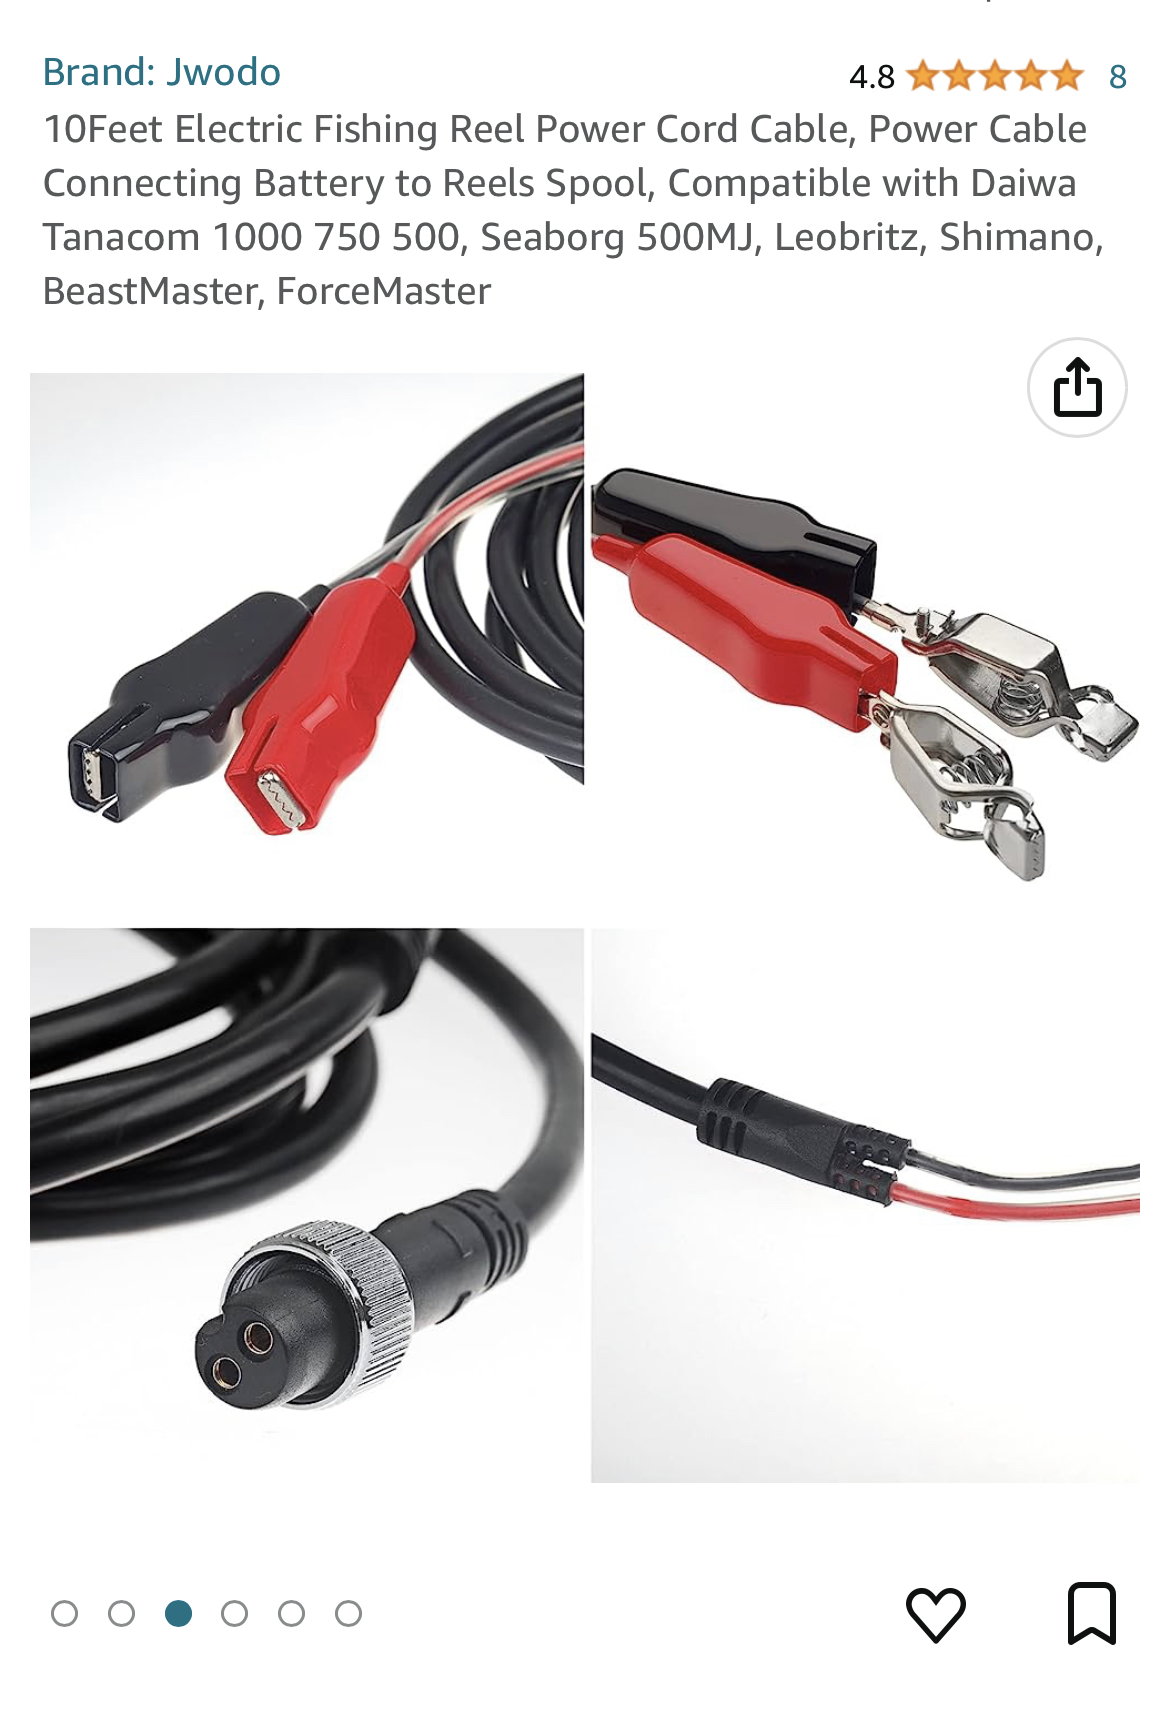 SHIM ANO/DAIWA ELECTRIC Fishing Reel Cable Battery Connection Line